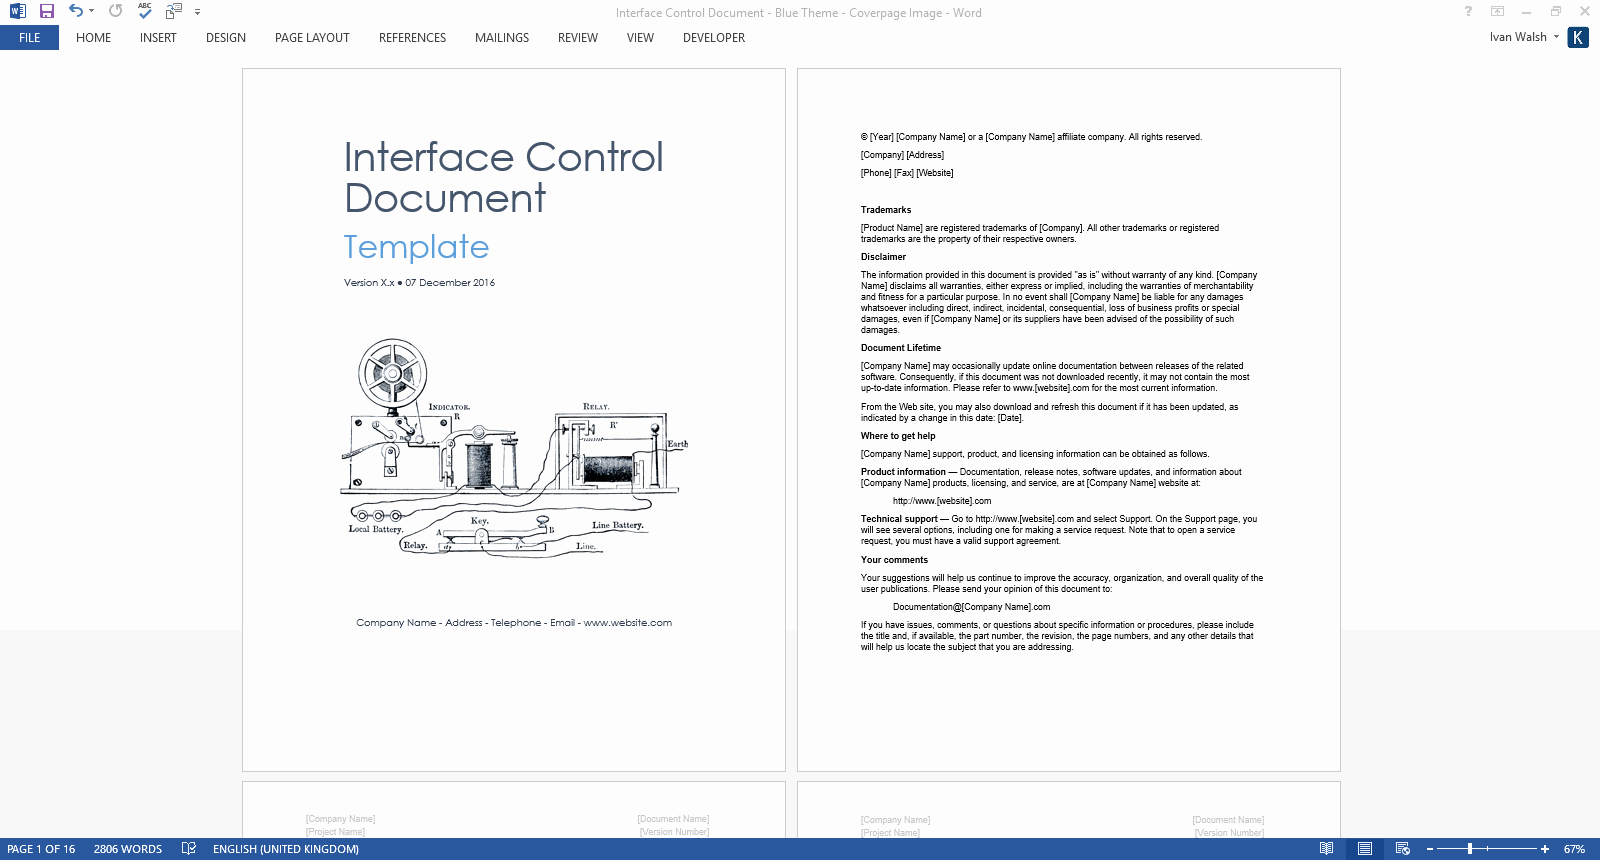 Use Case Documentation Template Lovely Interface Control Document – Download Ms Word Template